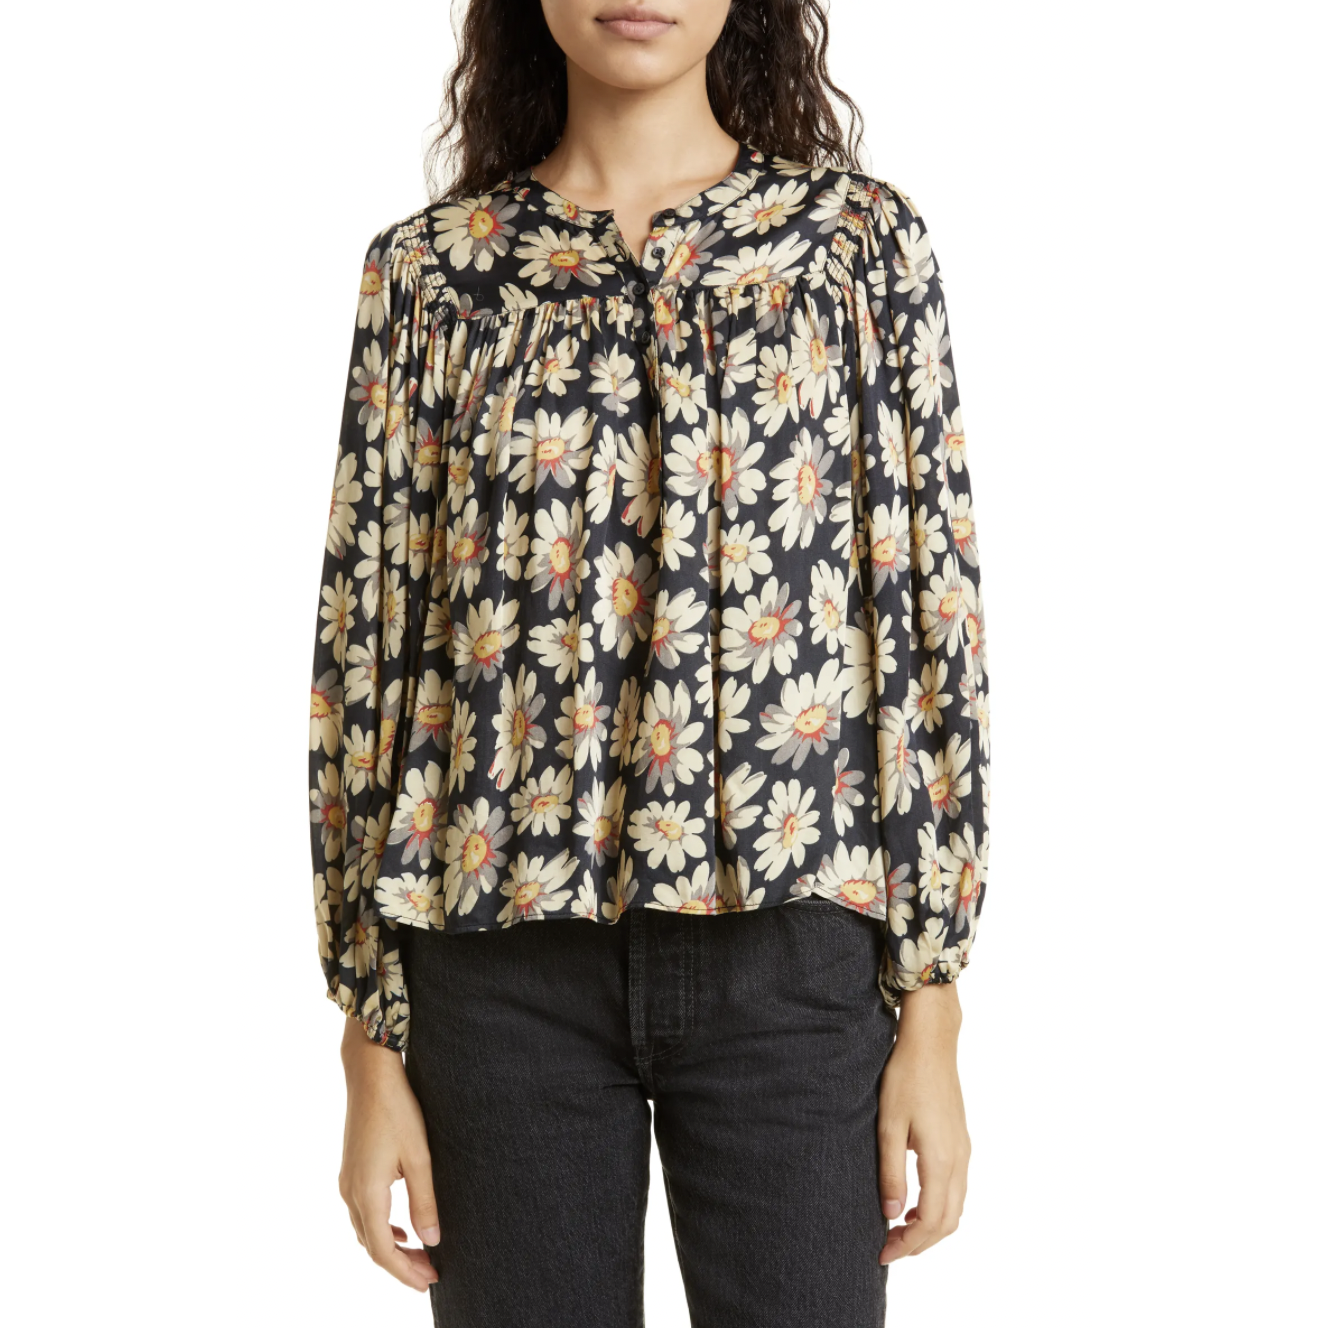 The Tale Top - Frosted Winter Floral